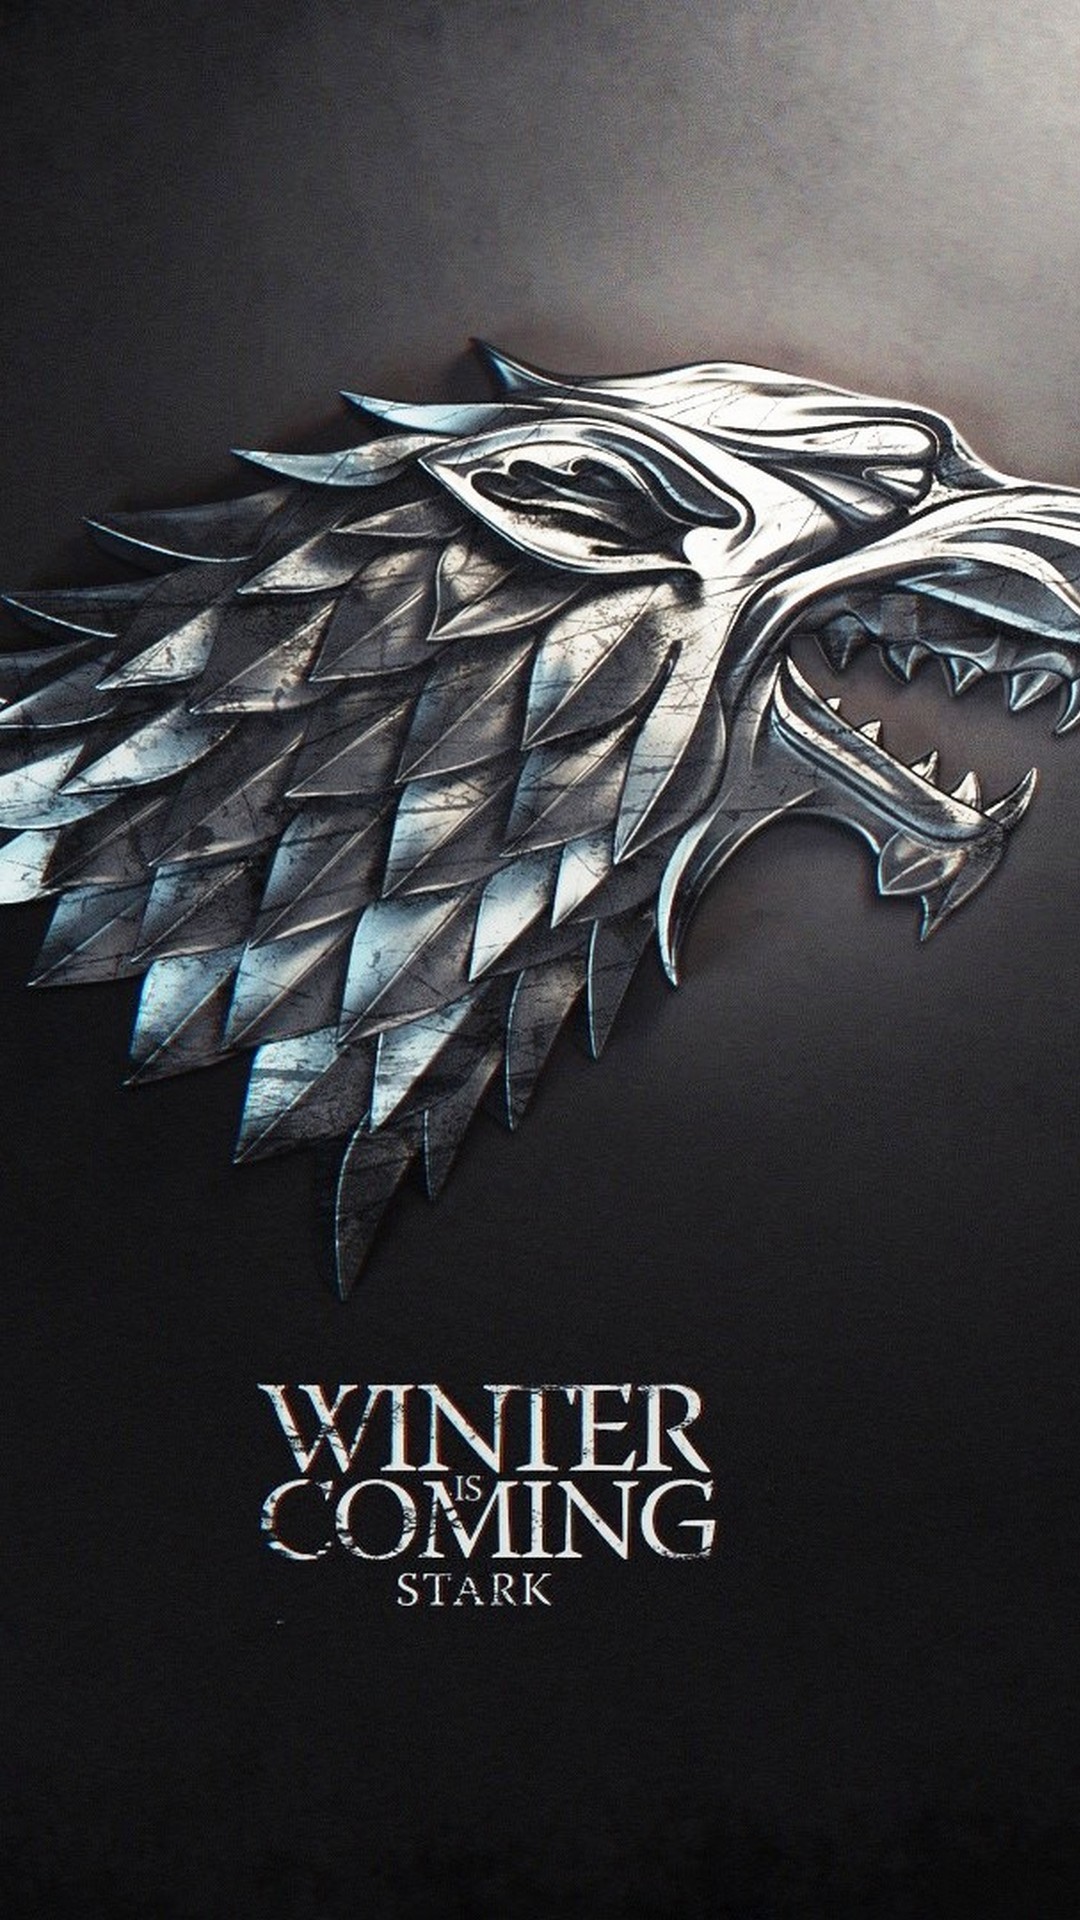 game of thrones wallpaper hd,logo,wing,t shirt,font,graphic design